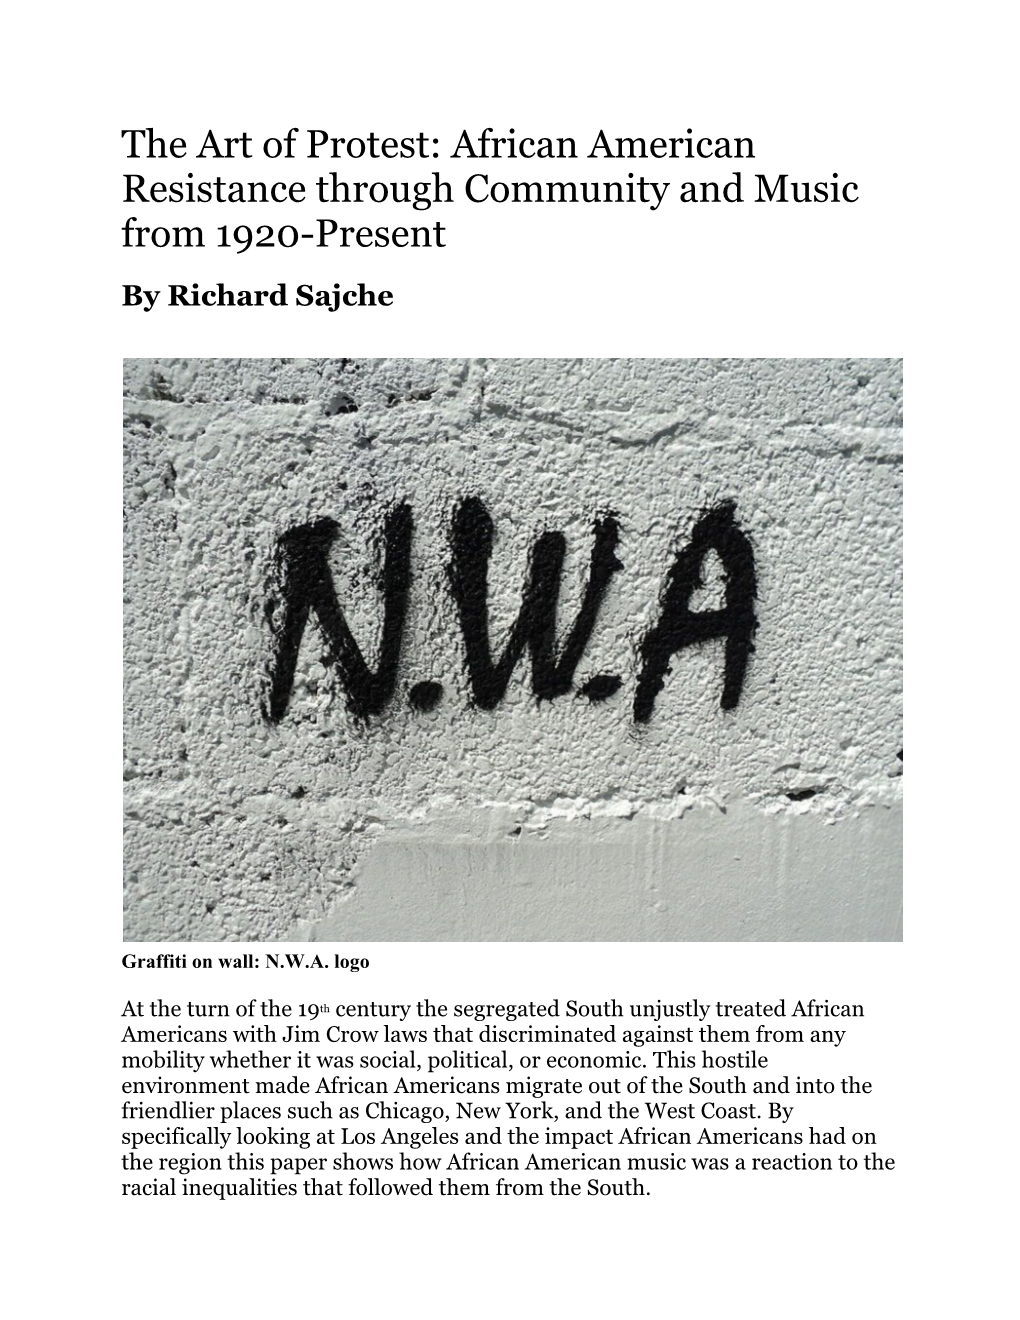 The Art of Protest: African American Resistance Through Community and Music from 1920-Present by Richard Sajche